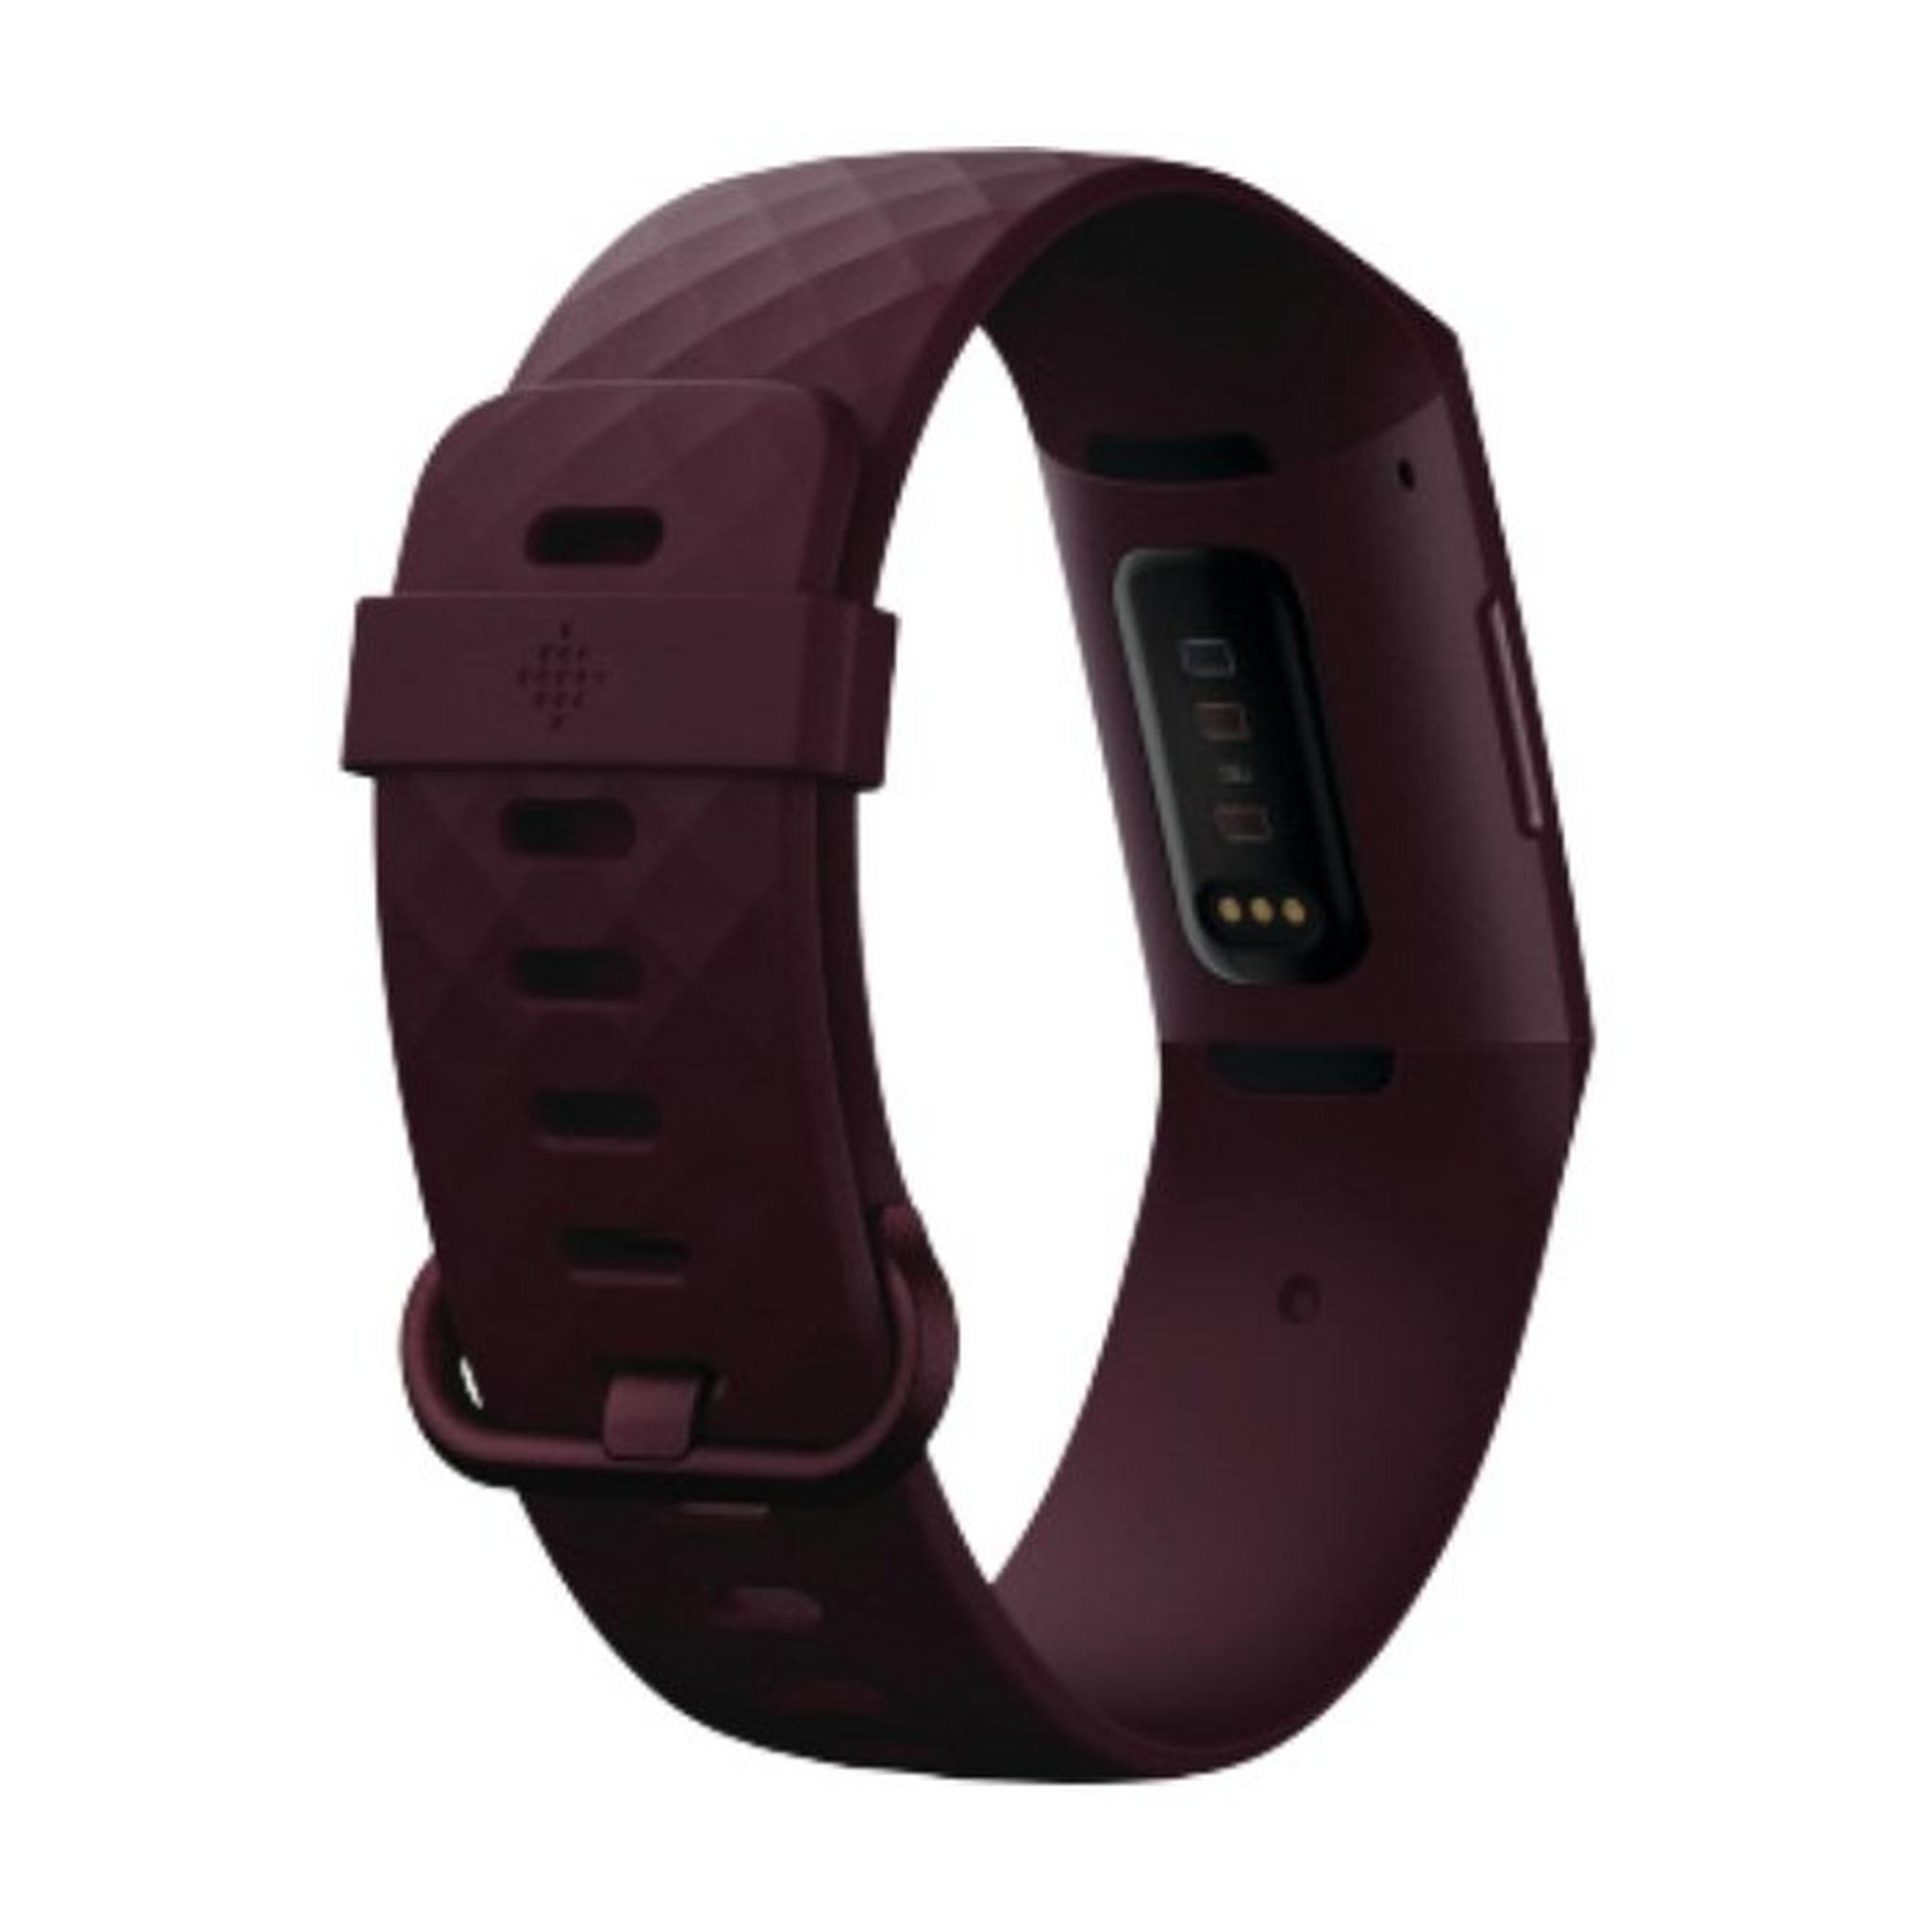 Fitbit Charge 4 NFC Fitness Tracker - Rosewood